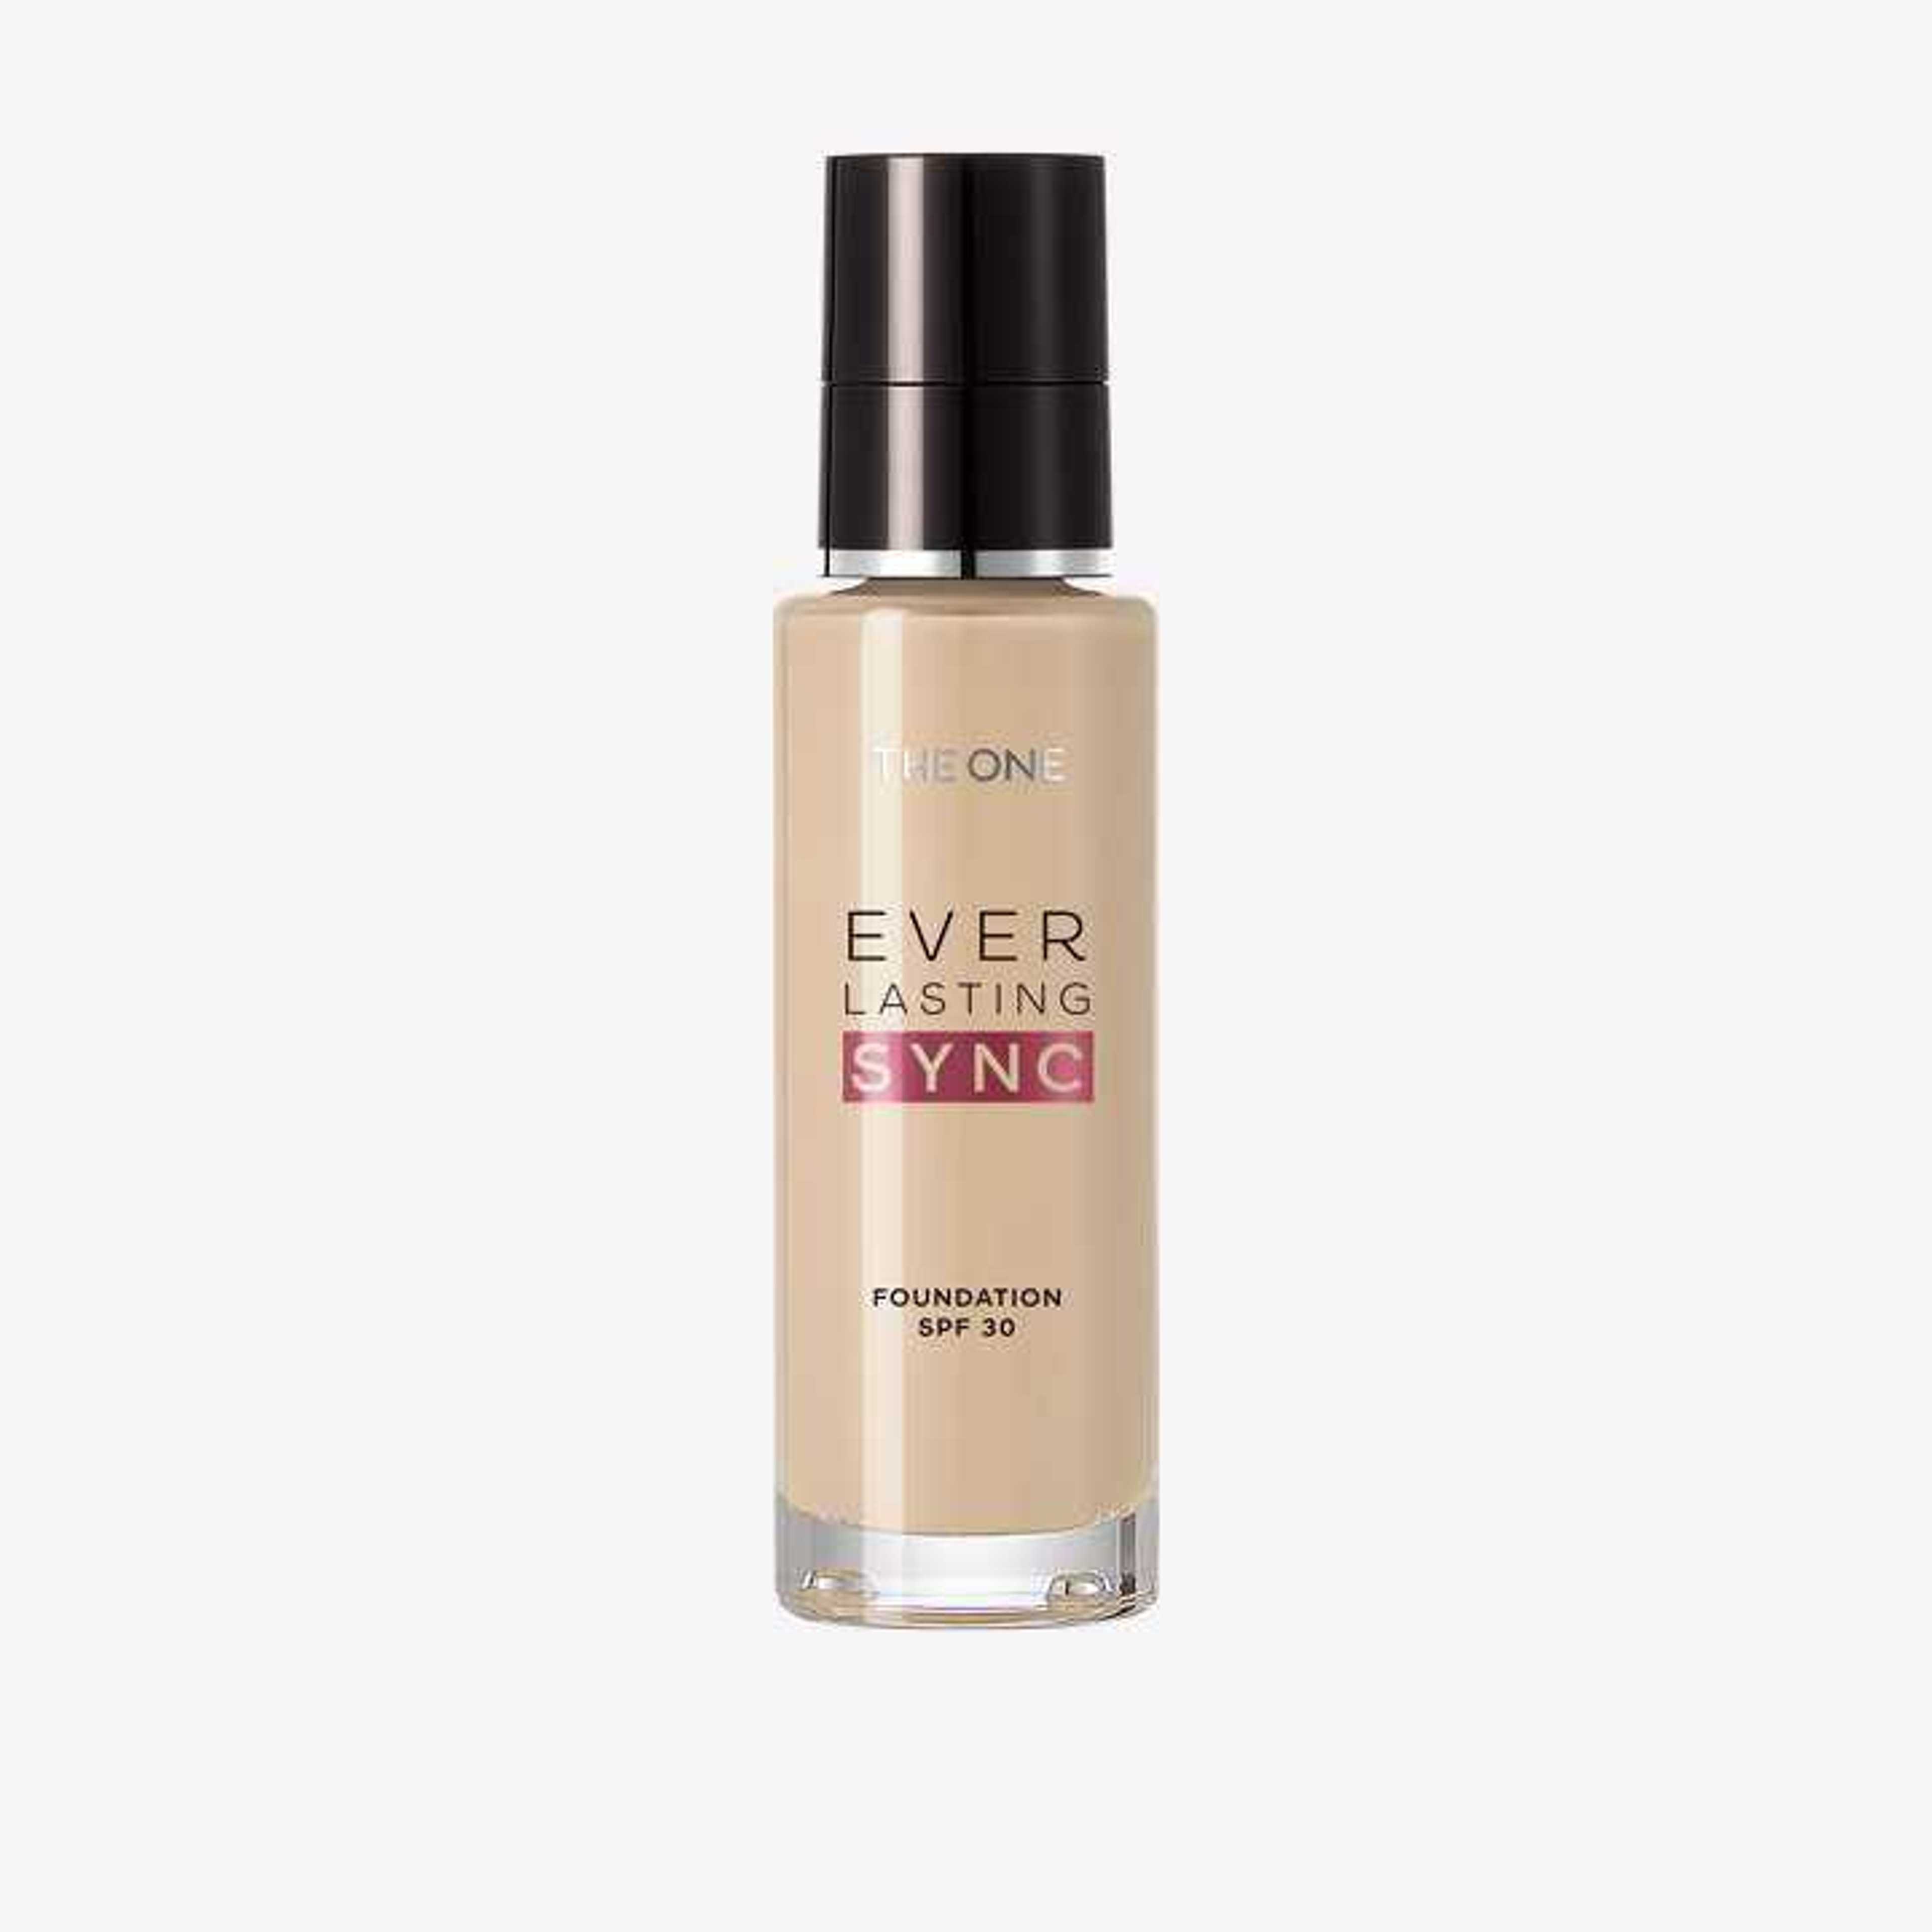 The ONE Everlasting Sync Foundation SPF 